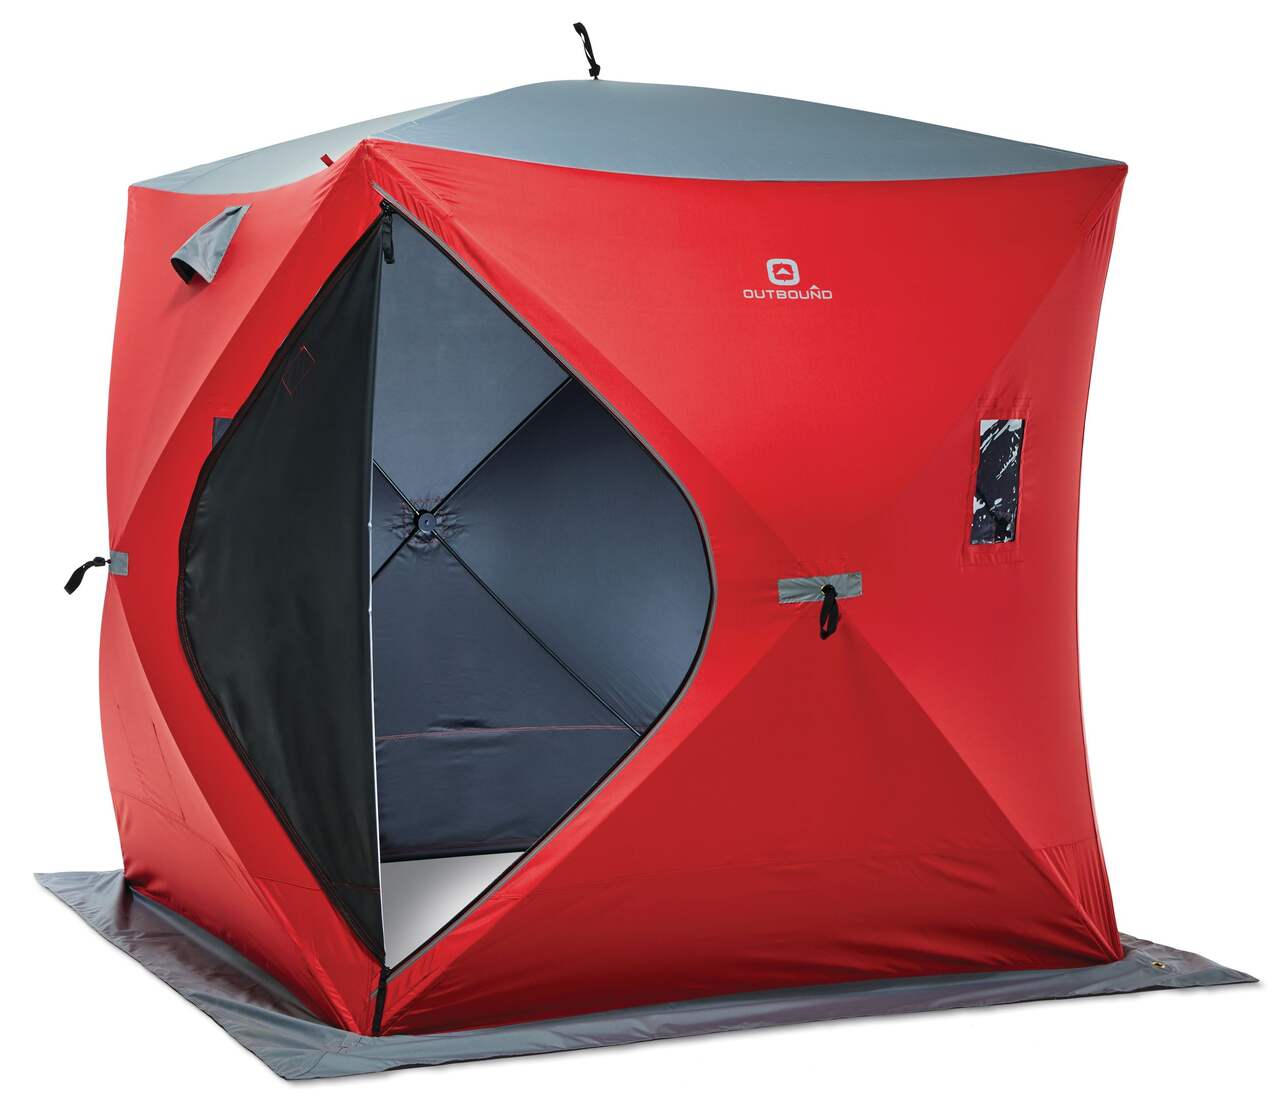 https://media-www.canadiantire.ca/product/playing/fishing/ice-fishing/0771806/outbound-ice-crystal-4-ice-shelter-d04f5029-154f-4a9a-b8ef-ad9875eff364-jpgrendition.jpg?imdensity=1&imwidth=1244&impolicy=mZoom